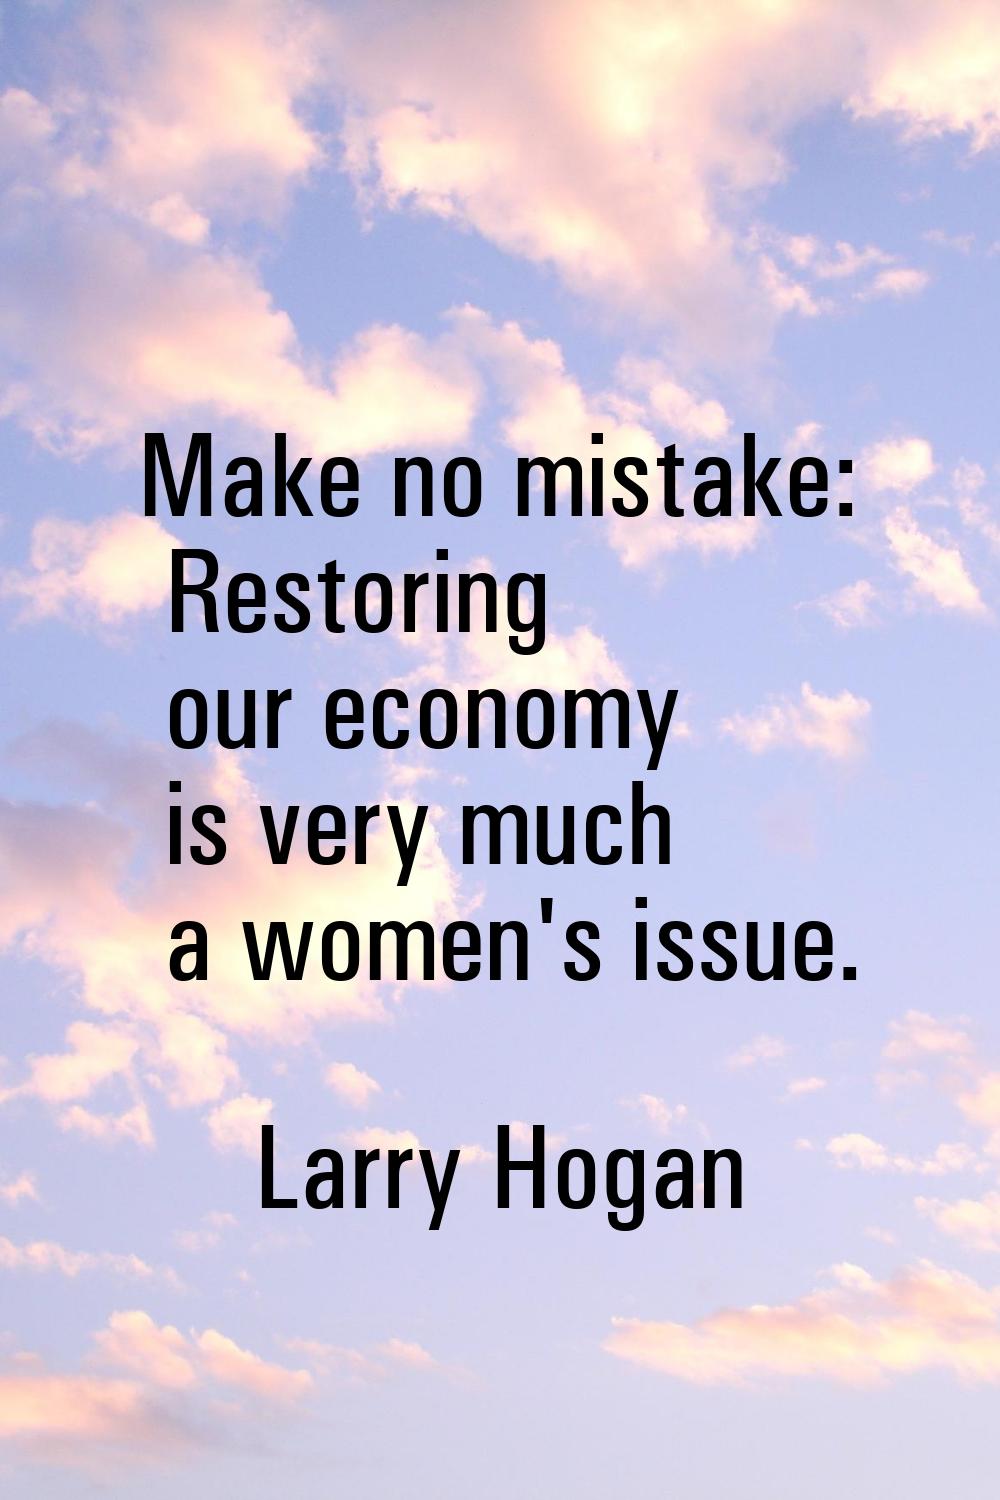 Make no mistake: Restoring our economy is very much a women's issue.